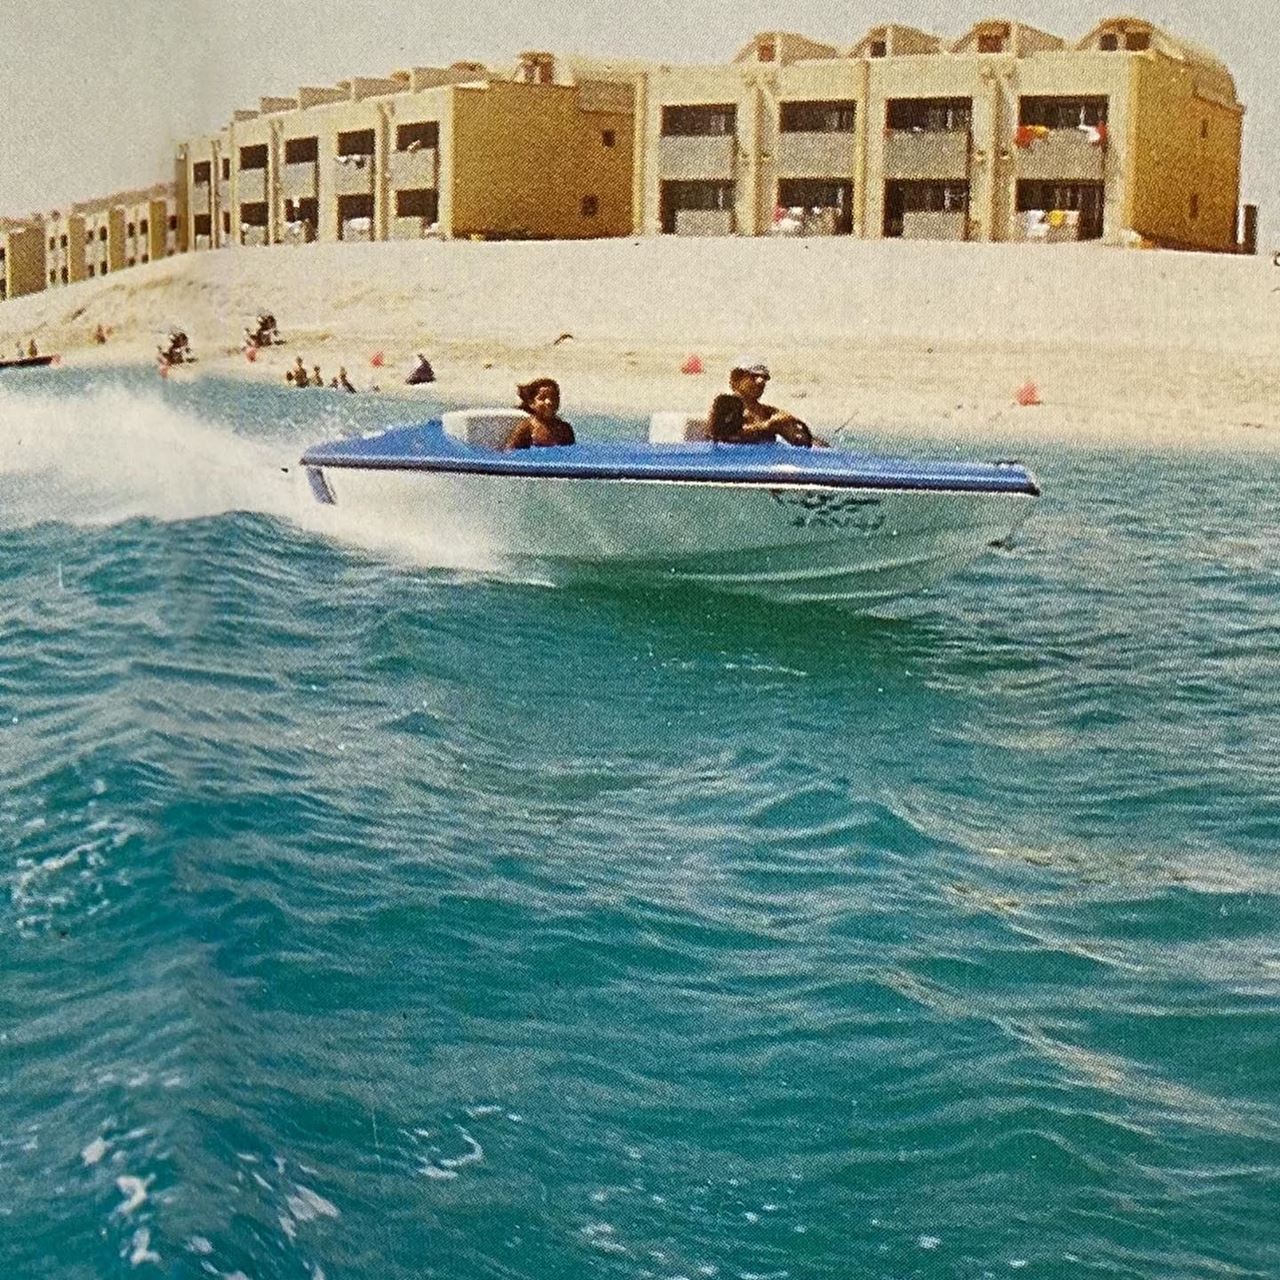 8 Unique Photos in Kuwait back in the Eighties